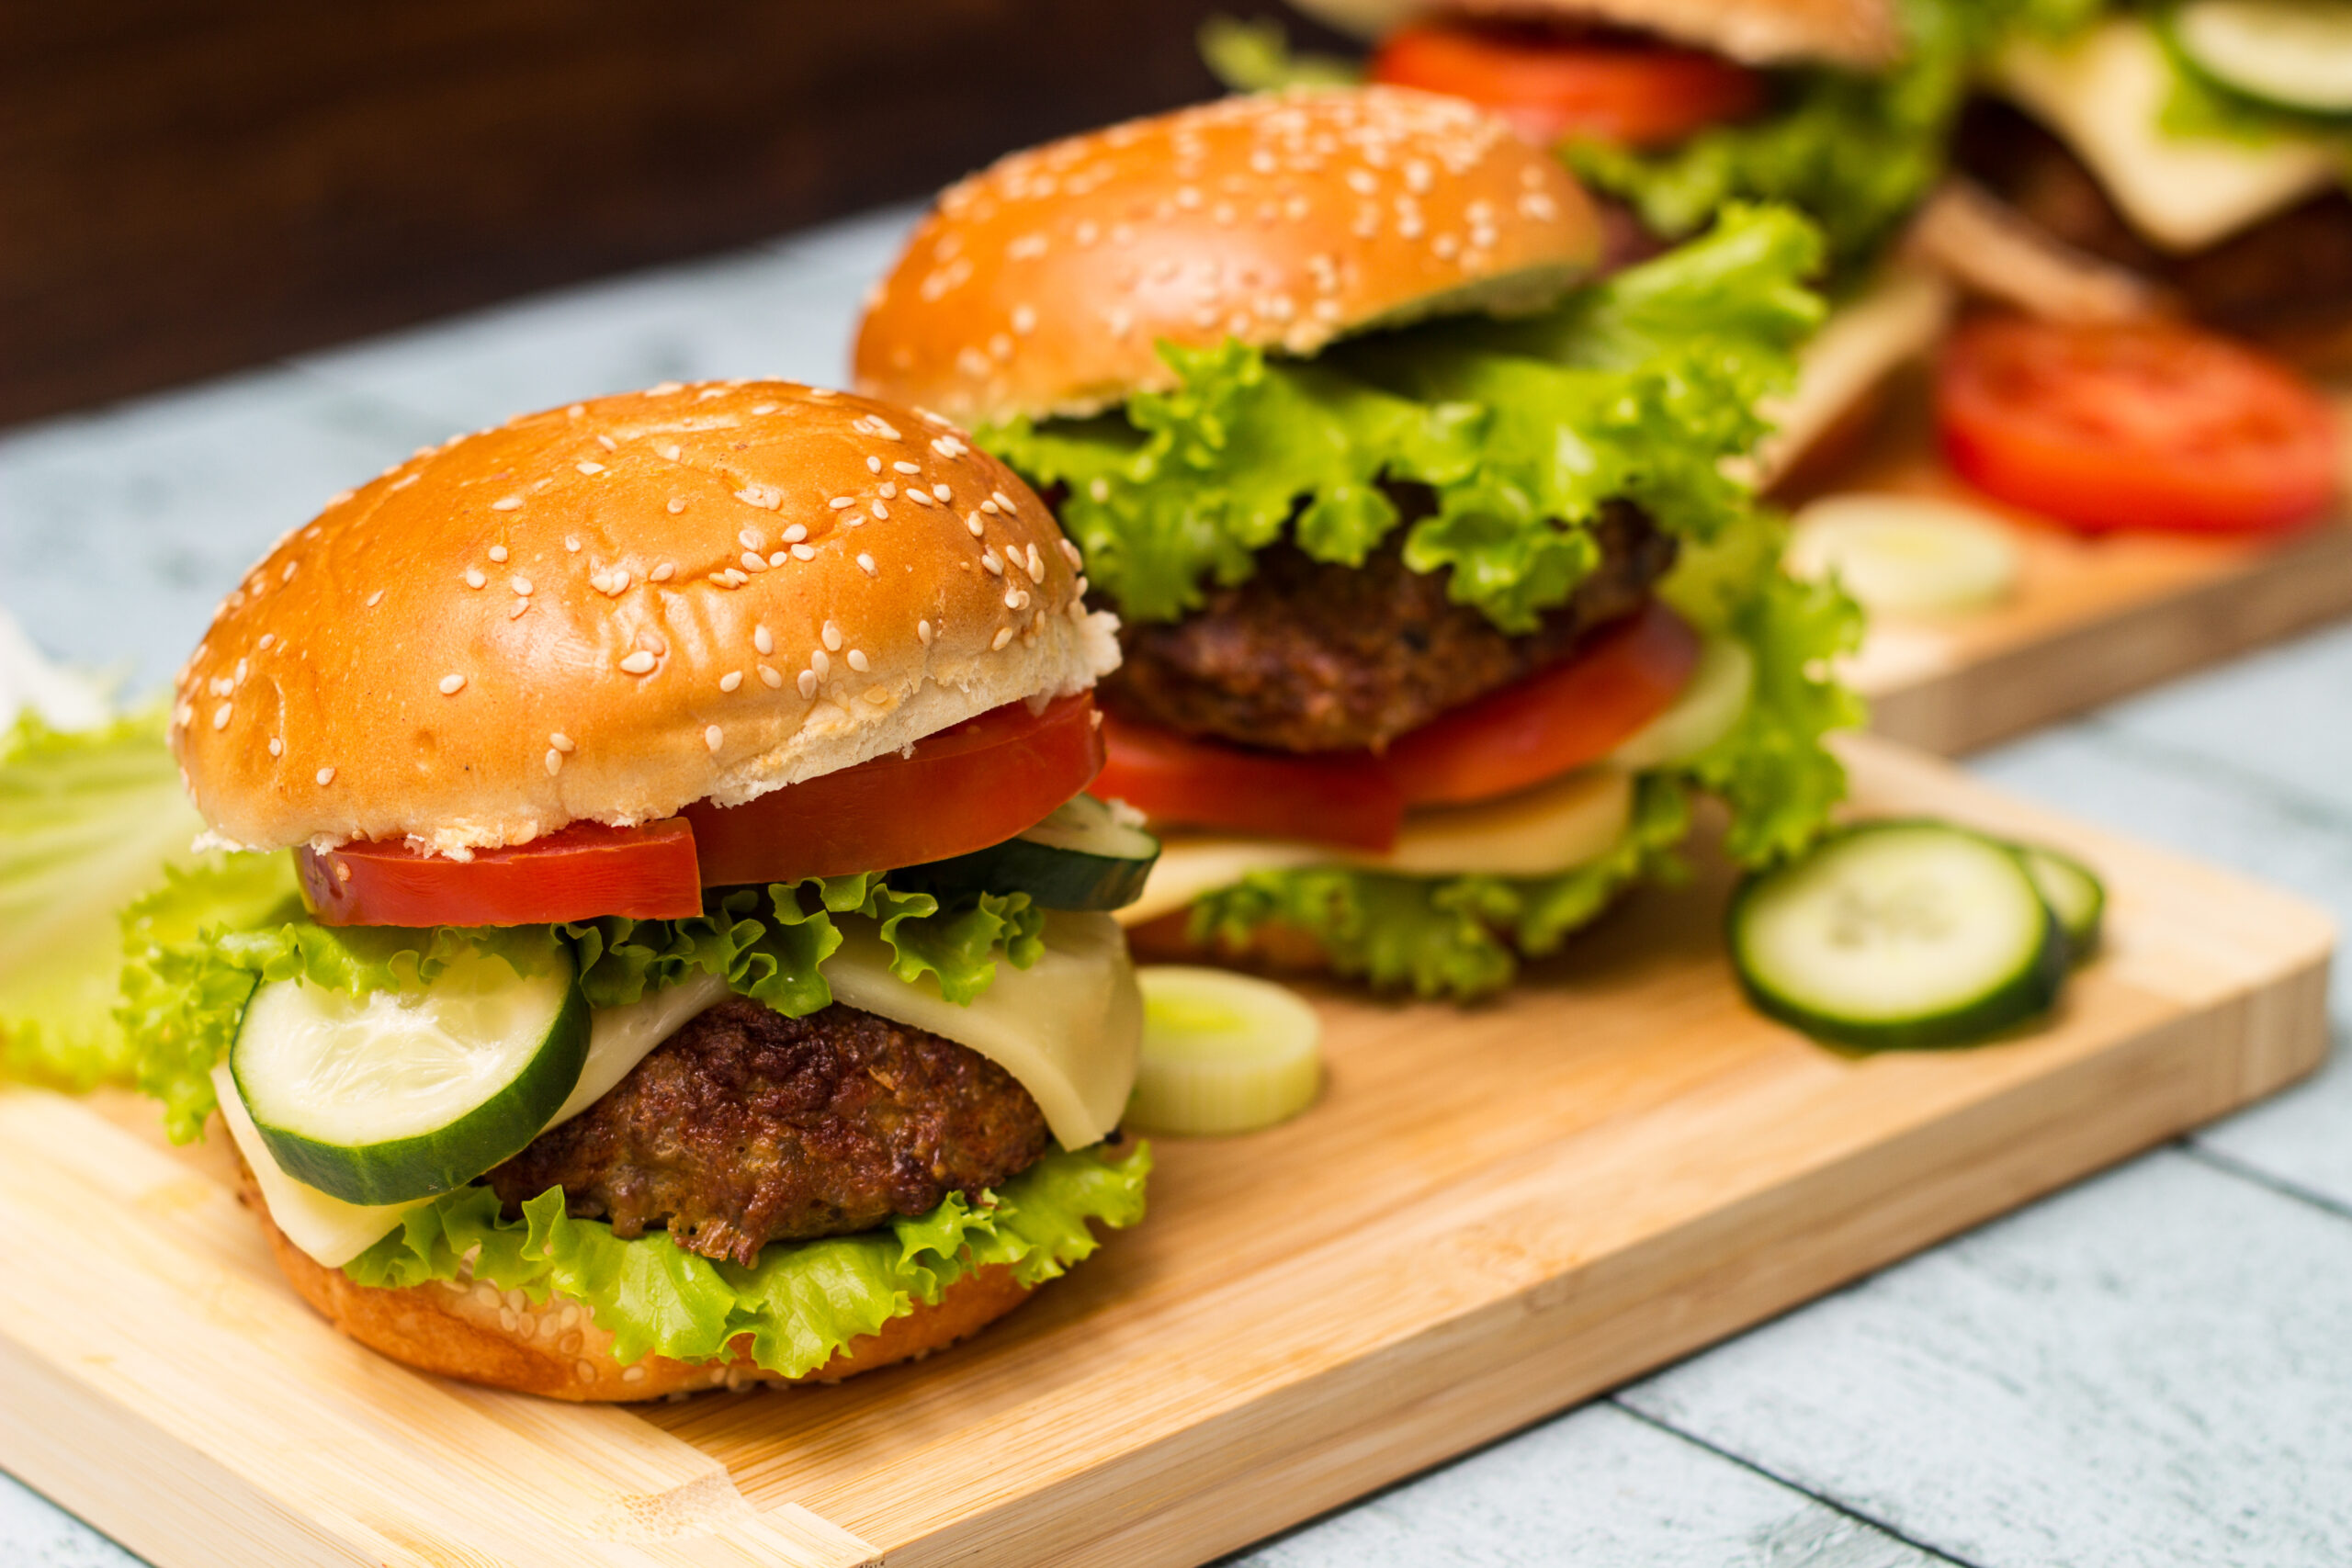 Burgers with beef meat, cheese and lettuce, served on cutting board